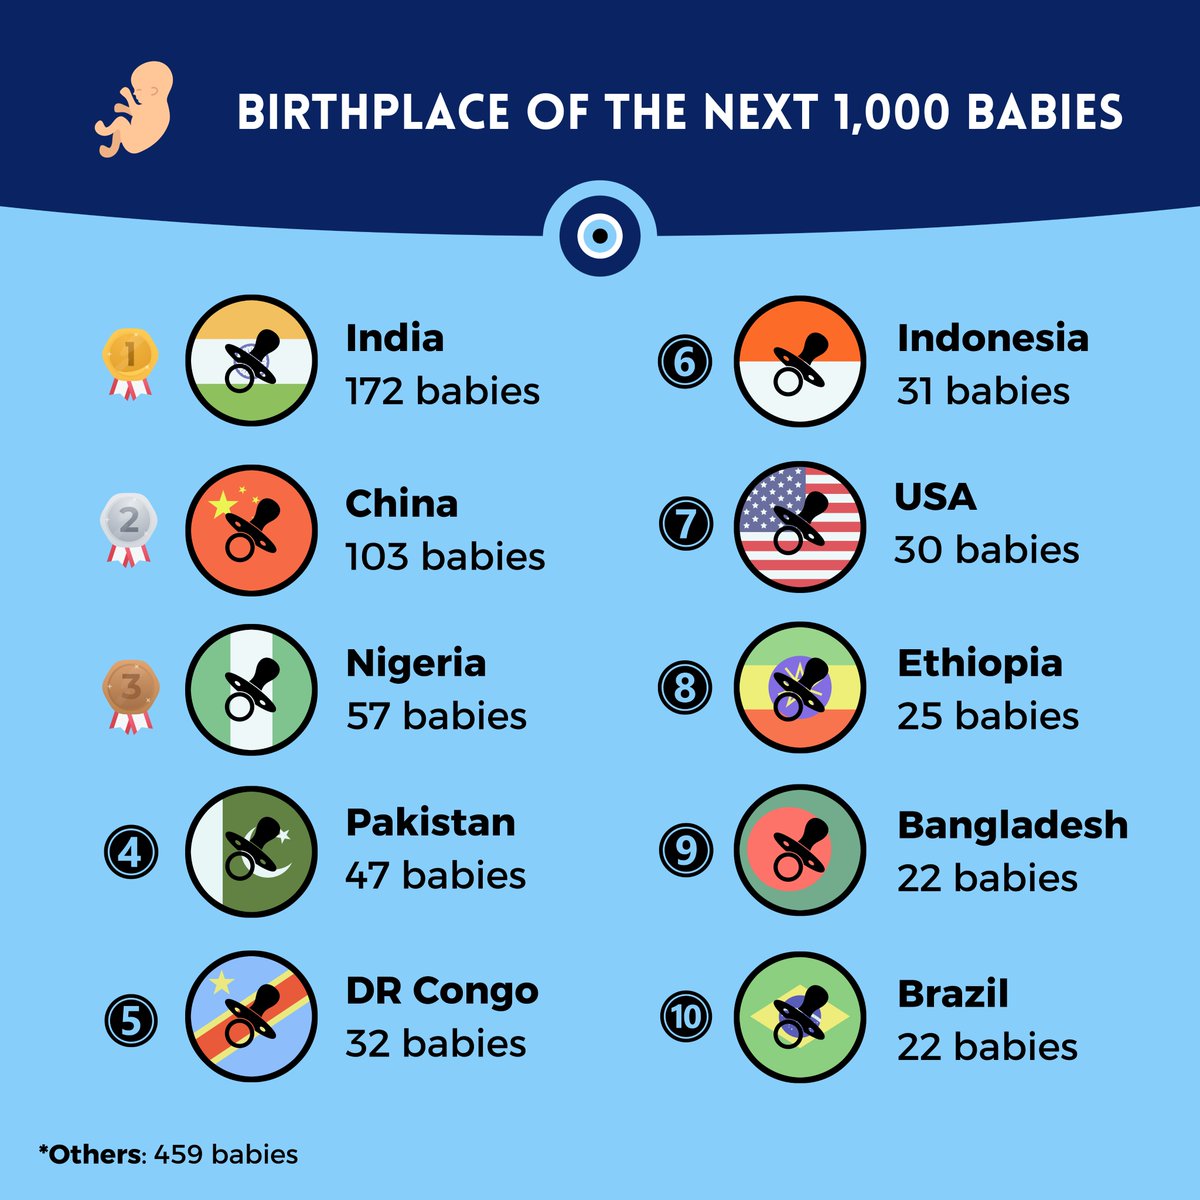 🍼 157 of the next 1,000 babies born in the world would be Indian.